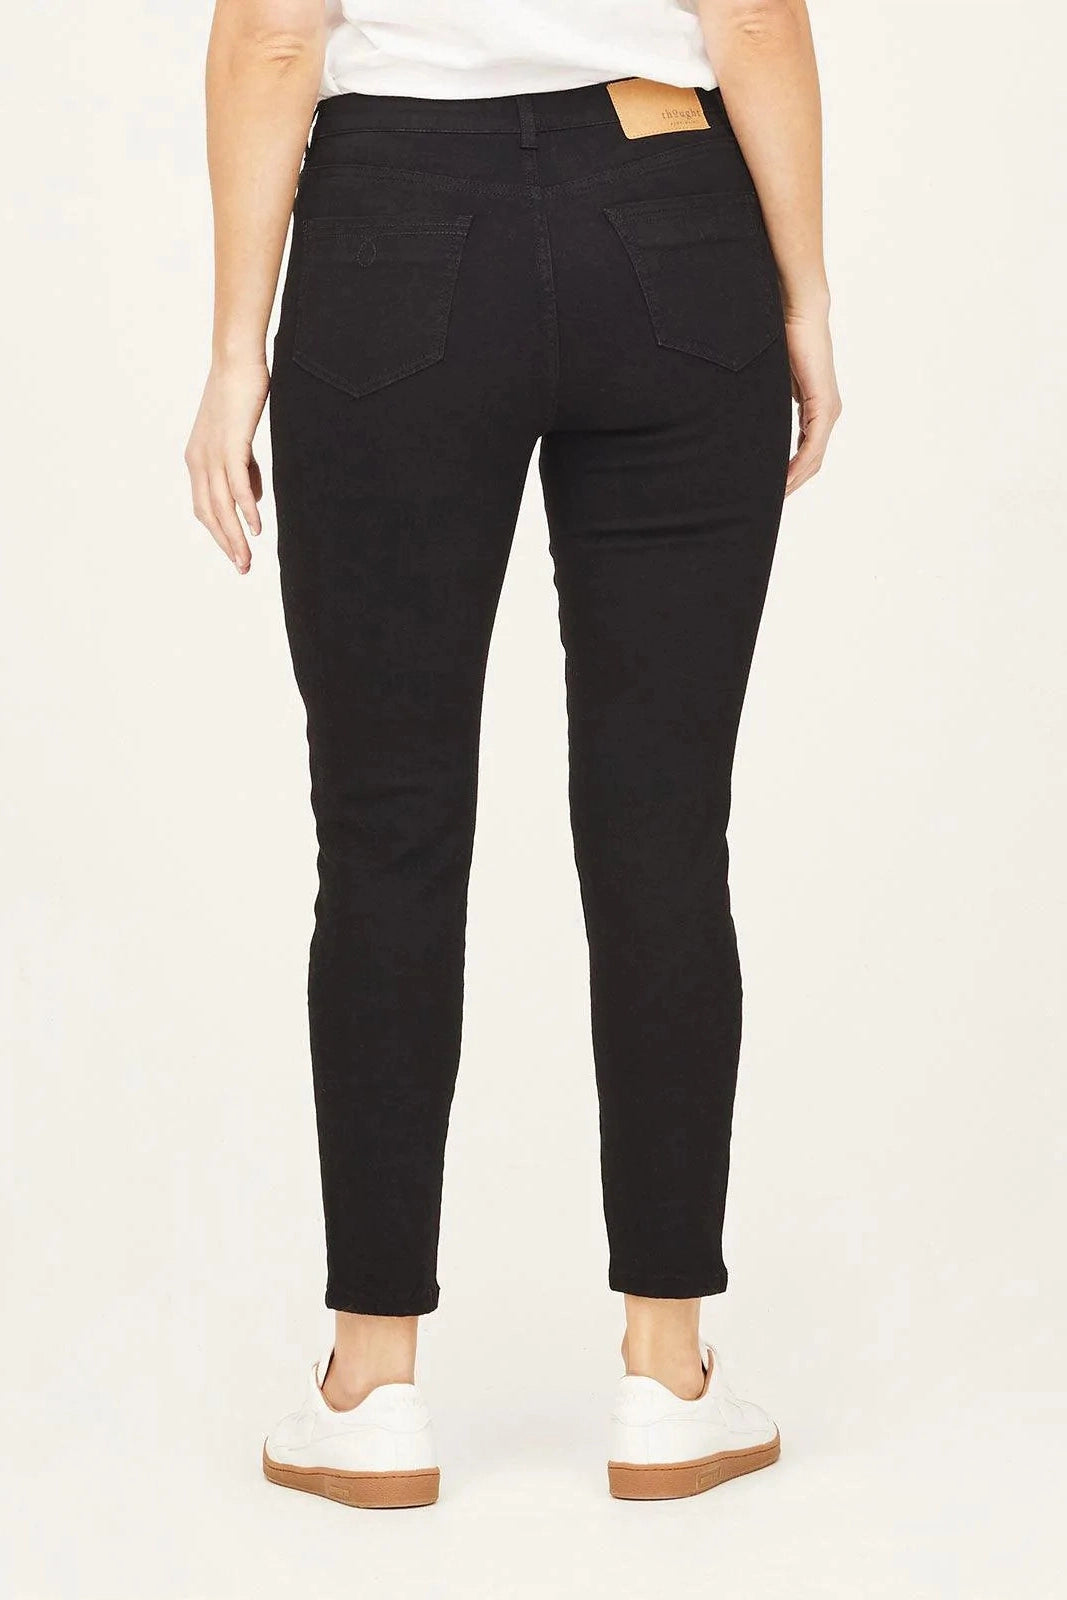 Thought GOTS Organic Cotton High-Rise Skinny Jeans in Black-Womens-Ohh! By Gum - Shop Sustainable